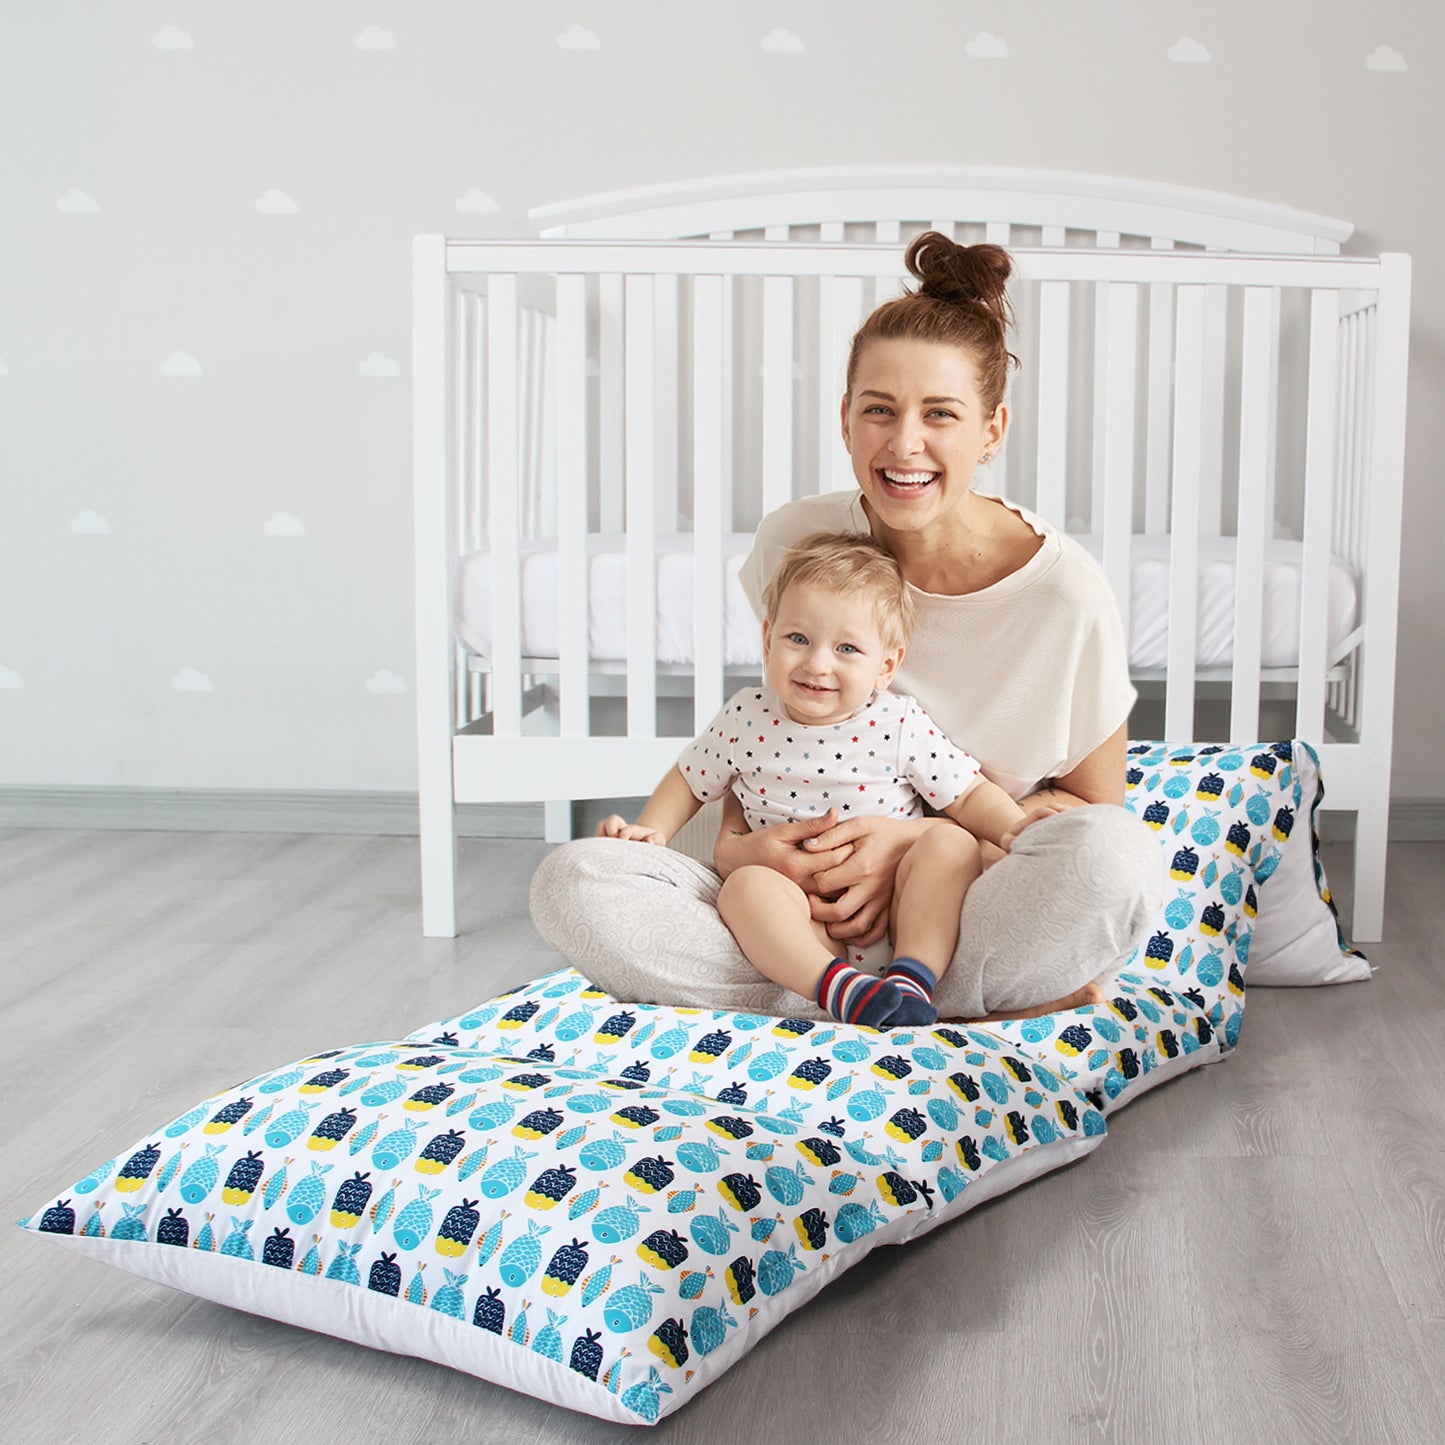 Kids Pillow Bed Floor Lounger Cover, Non-Slip and Super Soft, Queen/King Size, Fish - Biloban Online Store